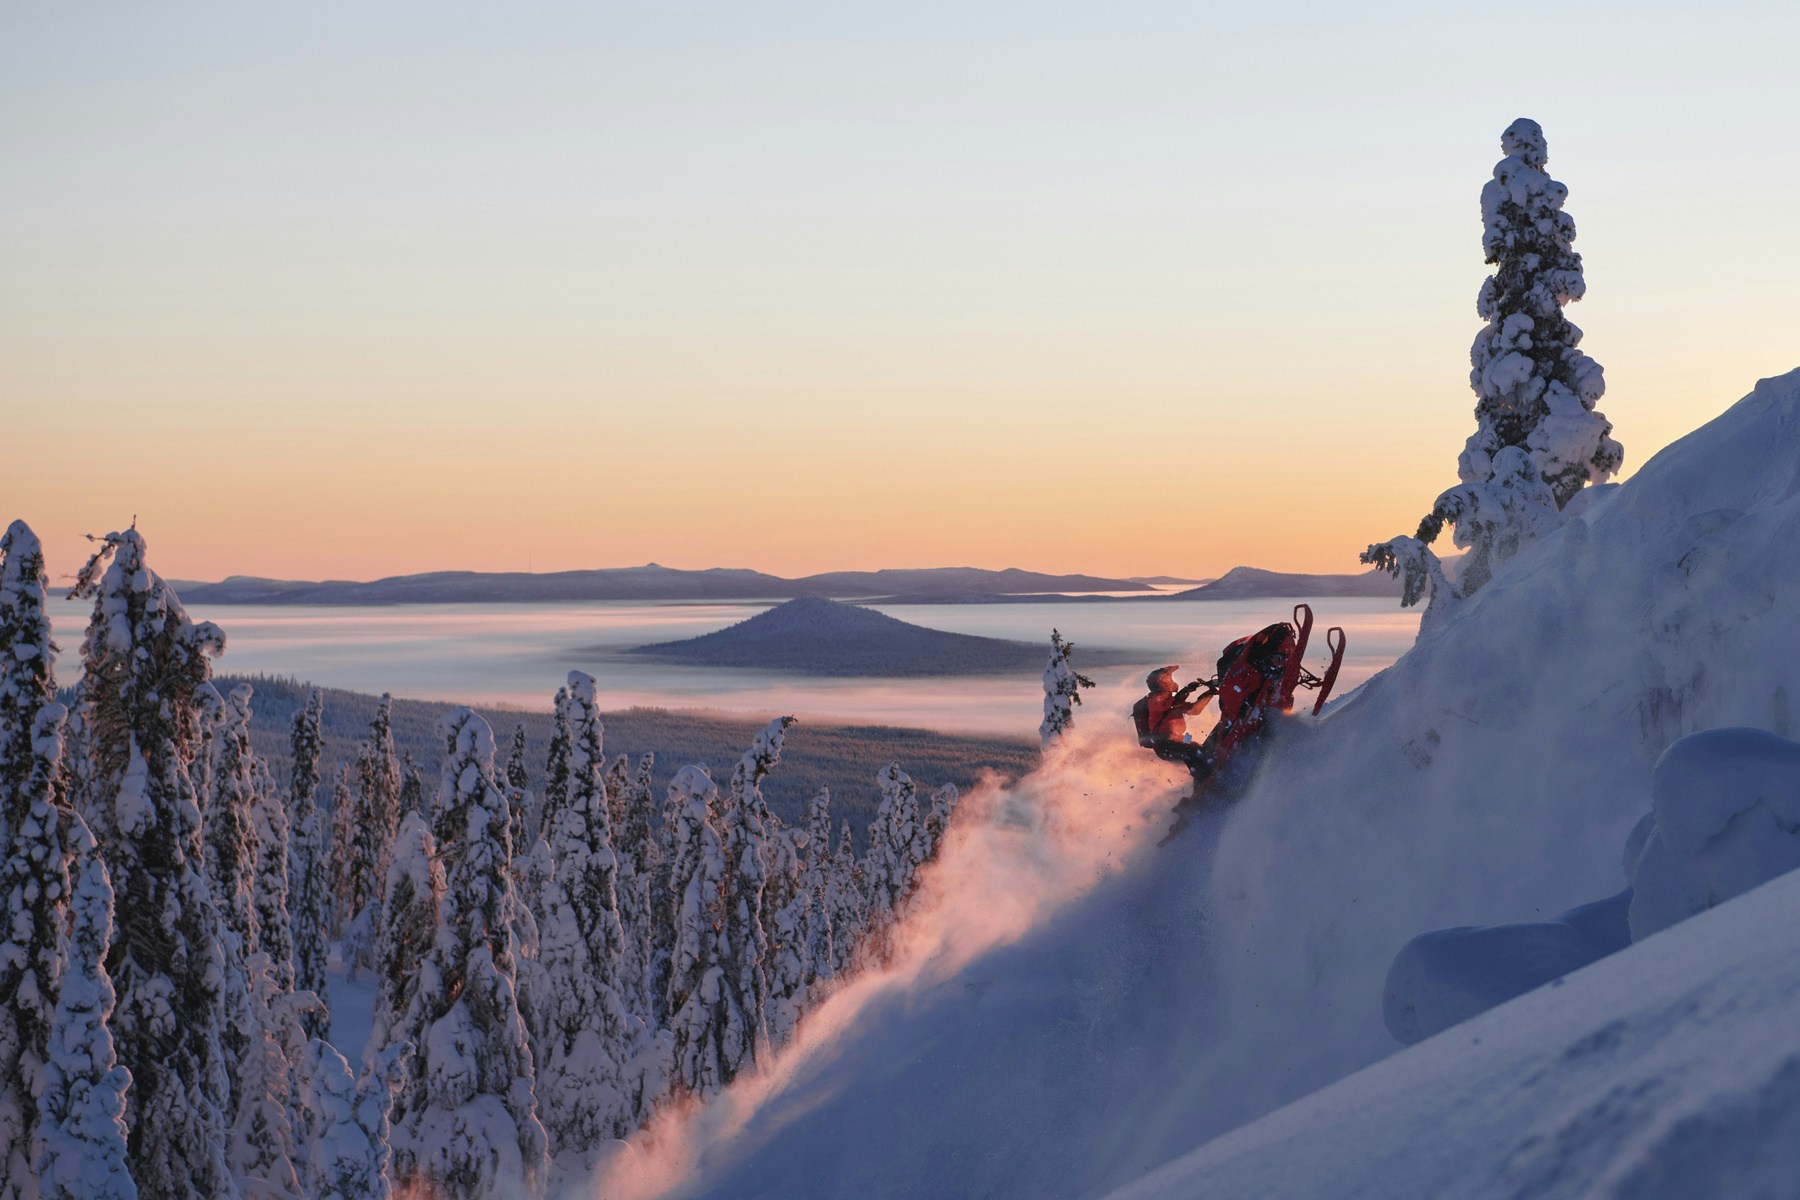 A snowmobile being driven in the sunset